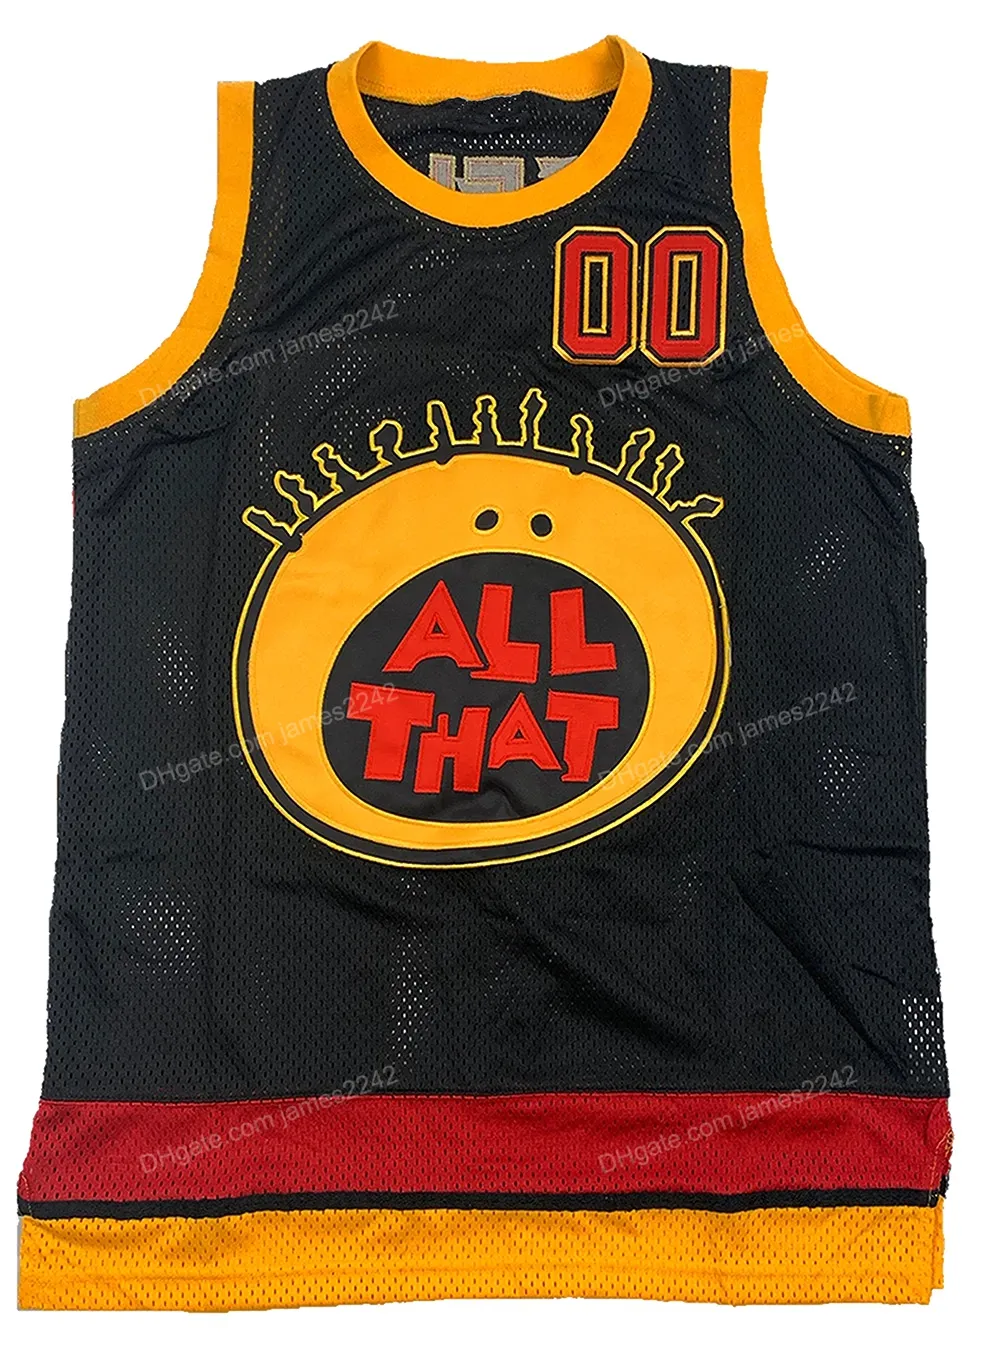 Ship from US Kel Mitchell #00 All That Basketball Jersey Men's Stitched Black Size S-3XL Jerseys